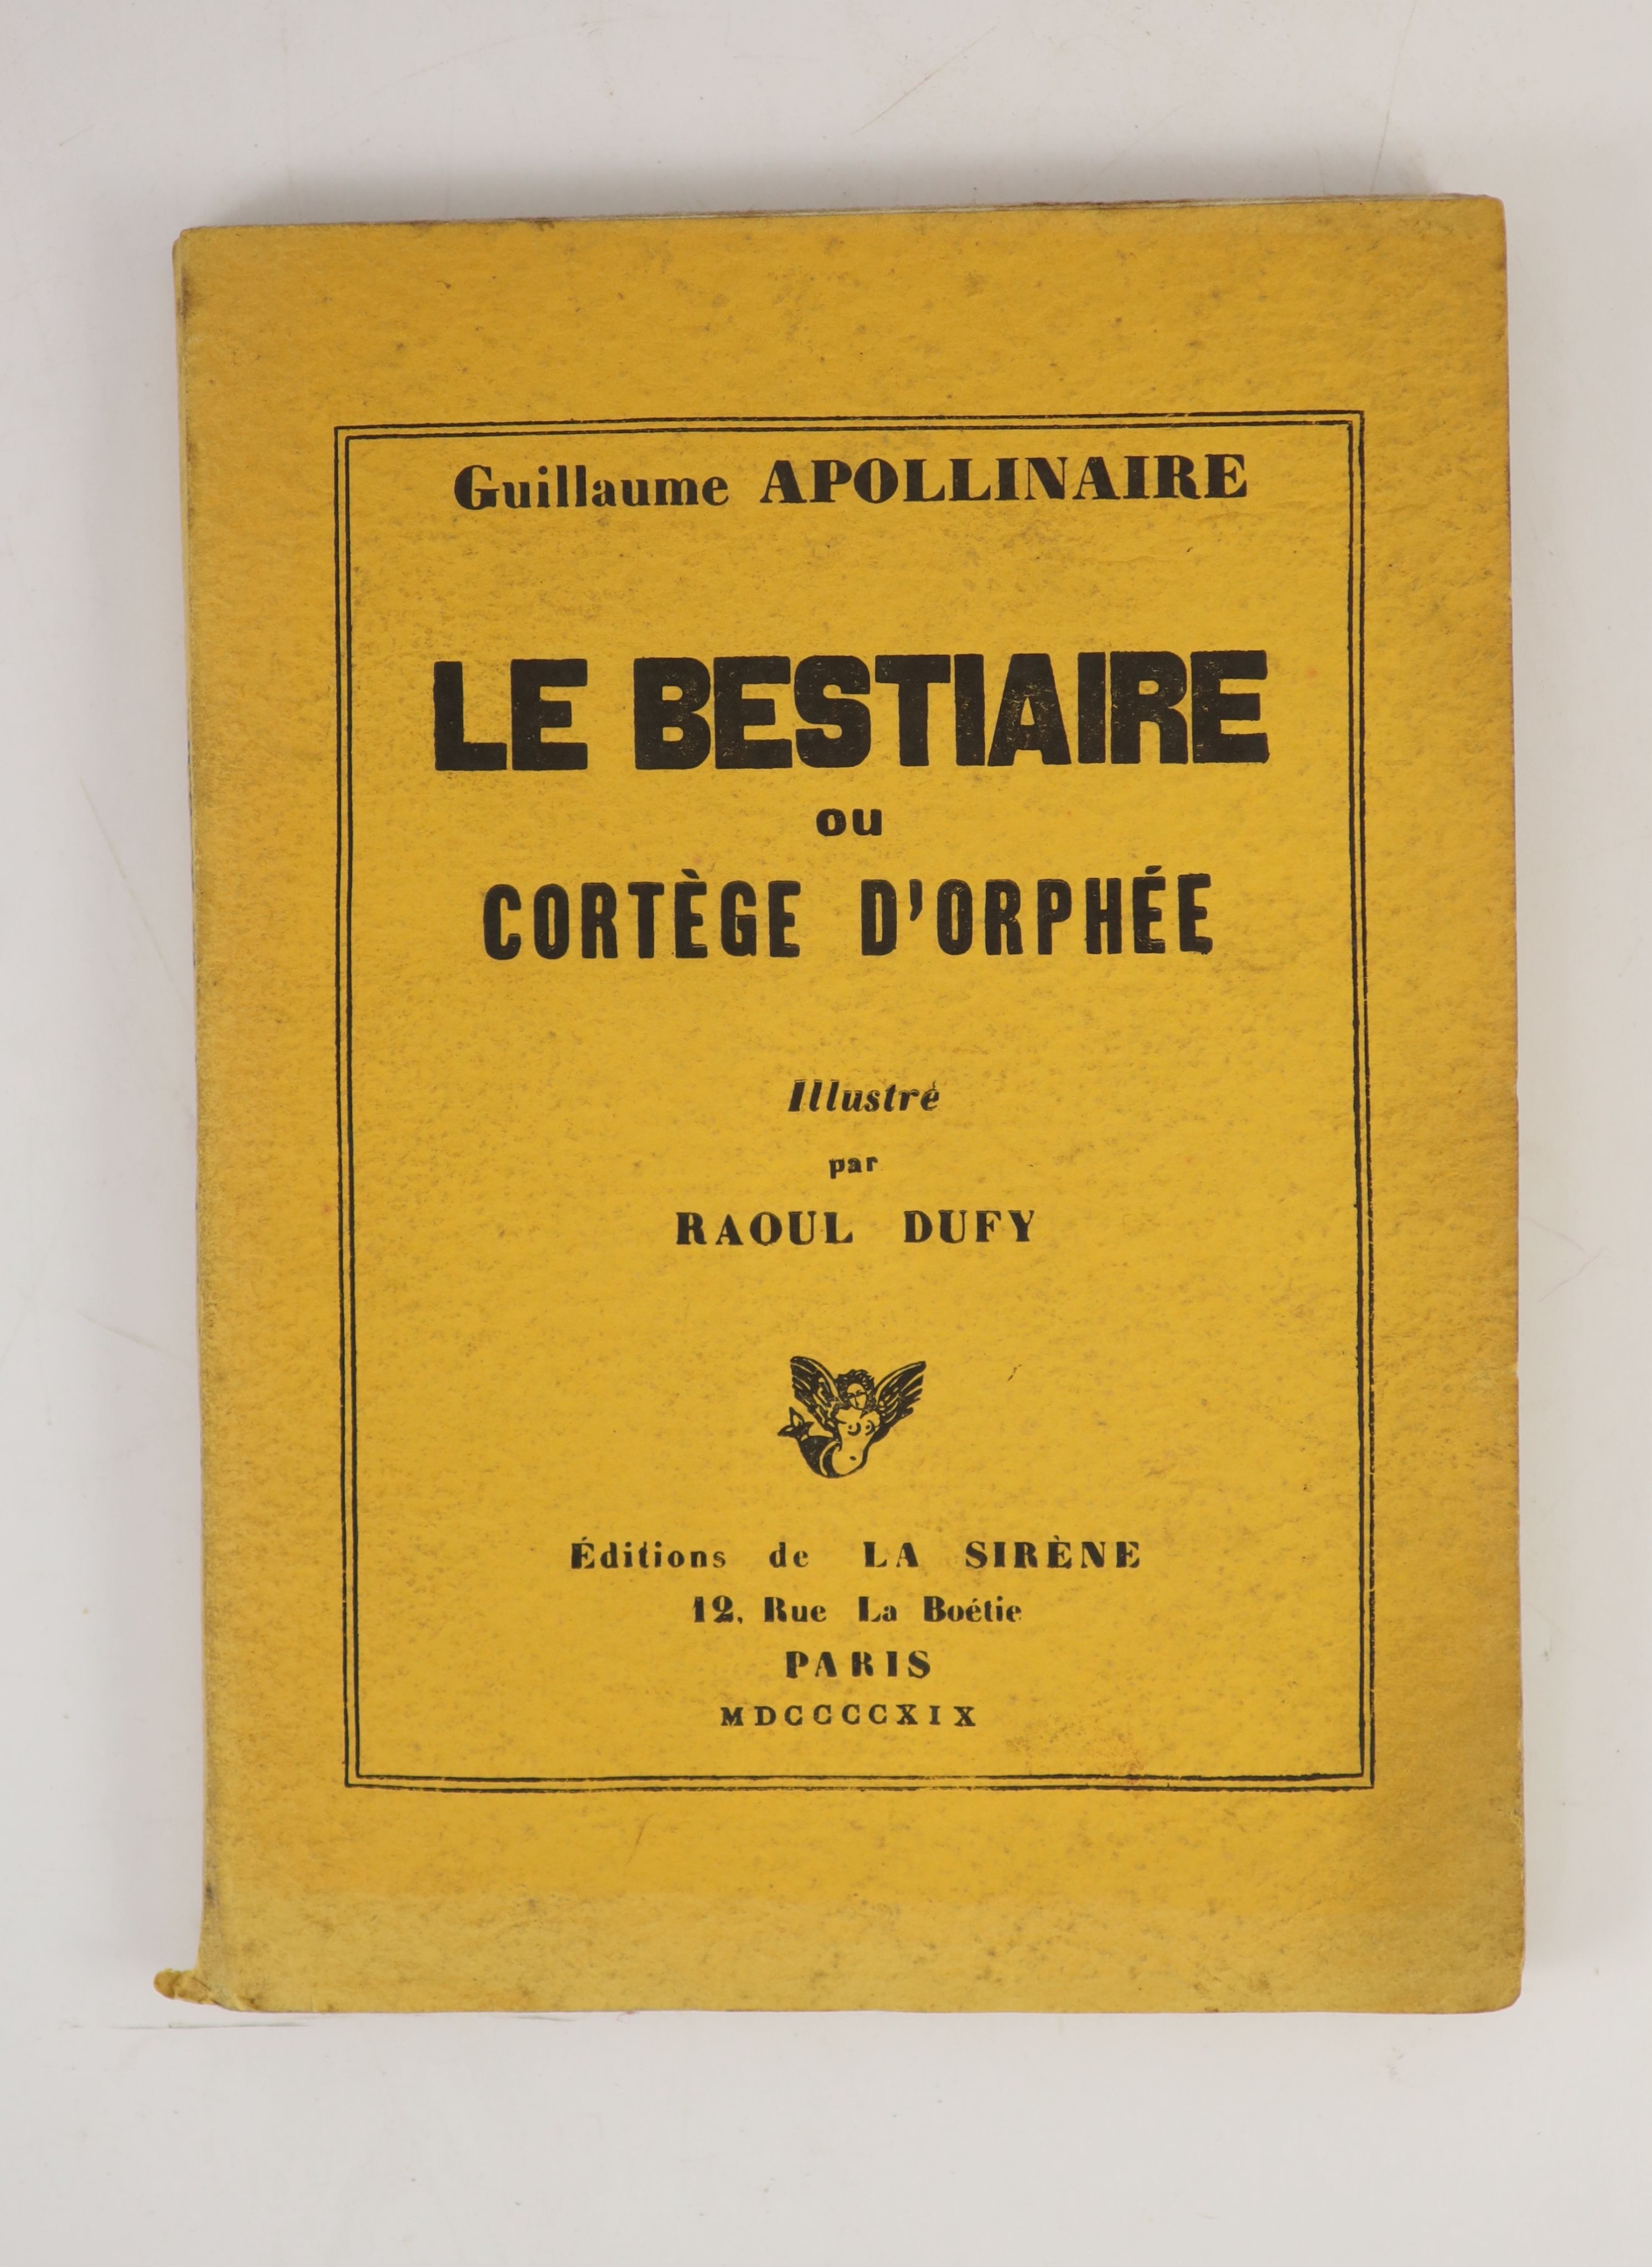 Apollinaire, Guillaume - Le Bestiaire ou cortège d’Orphee, one of 1250, illustrated with 32 wood engravings by Raoul Dufy, original yellow wraps, Paris, 1919